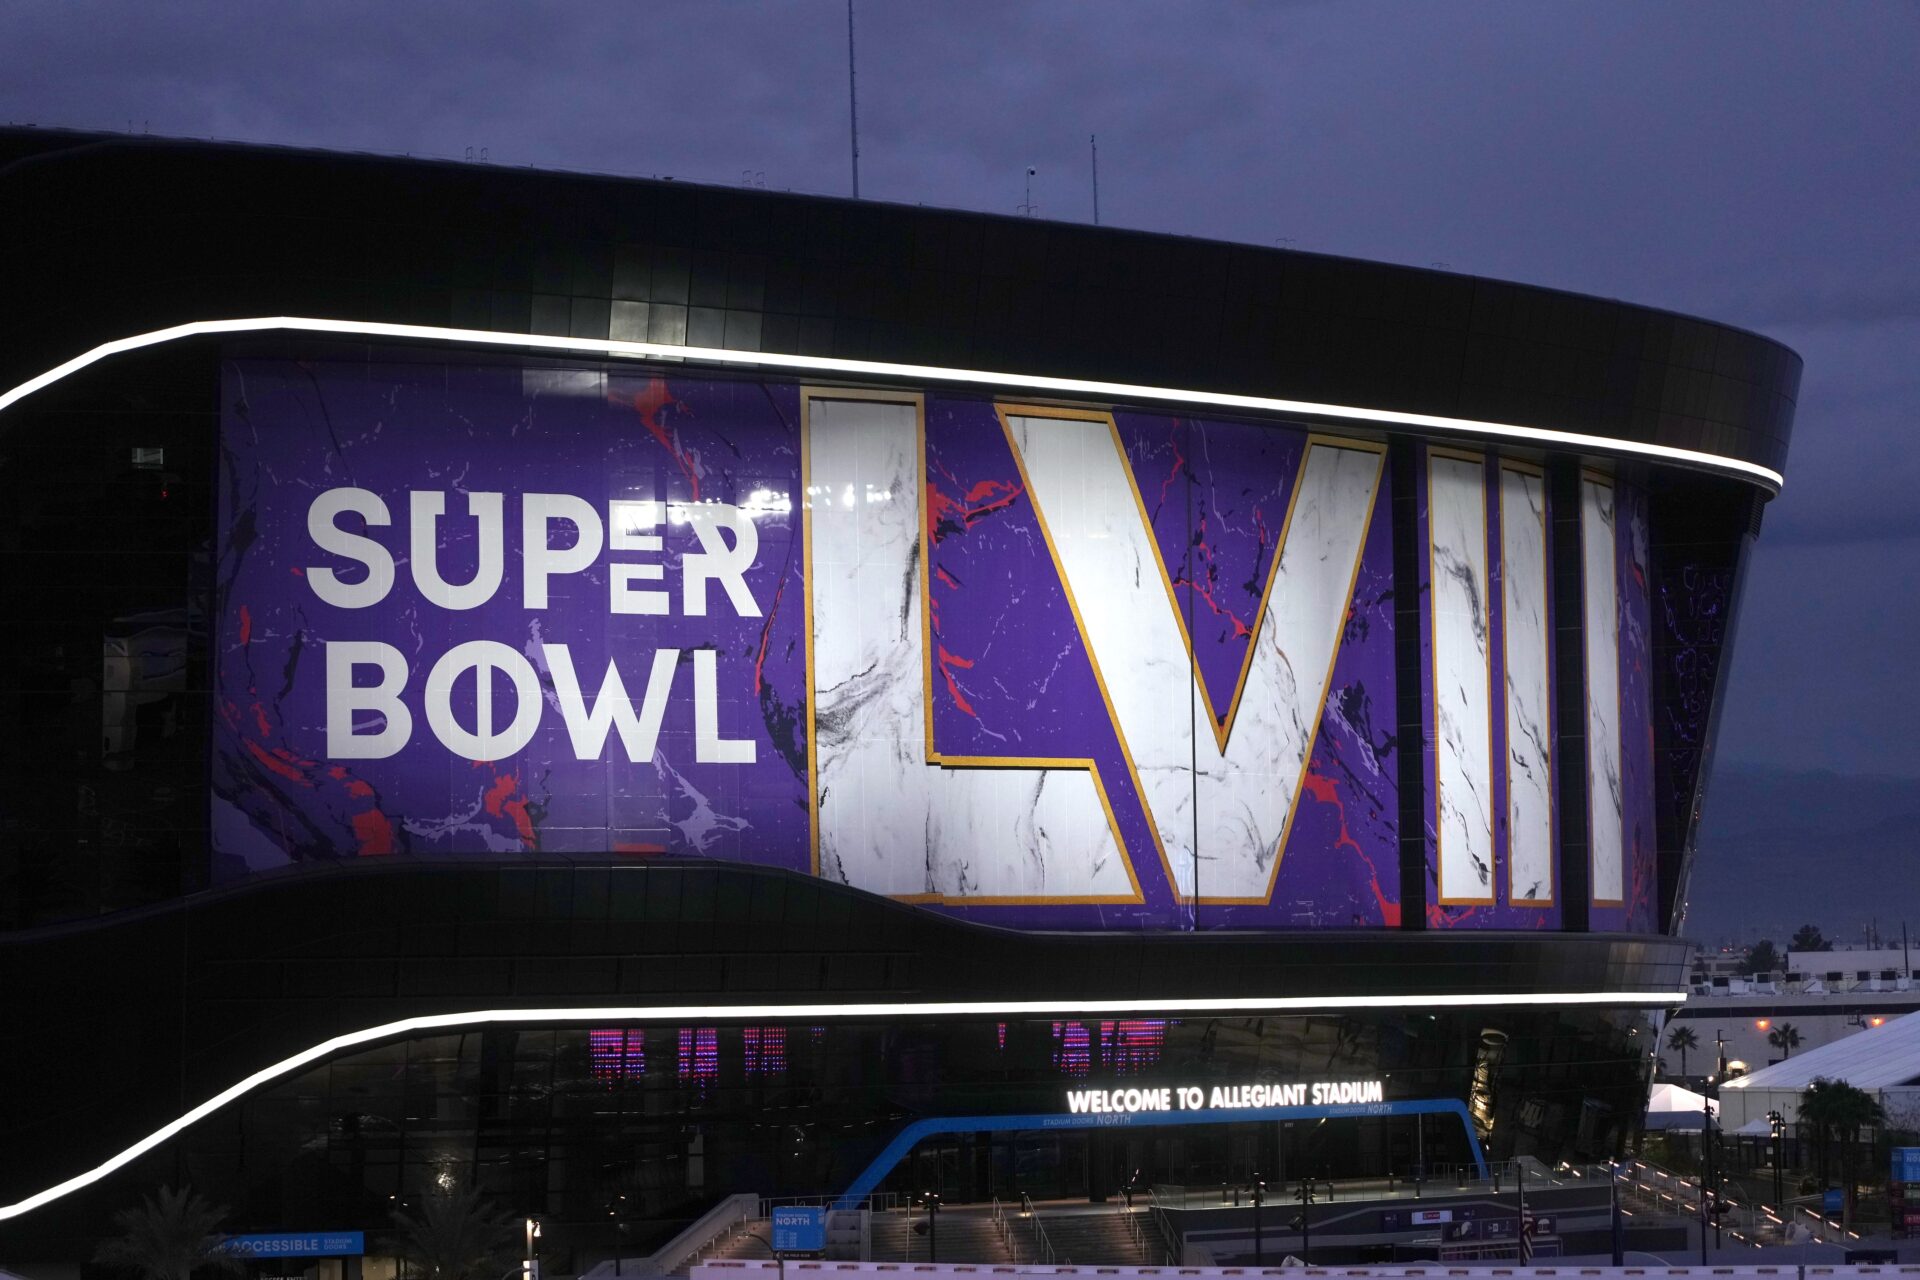 A general overall view of the Super Bowl 58 roman numerals logo on the Allegiant Stadium facade.